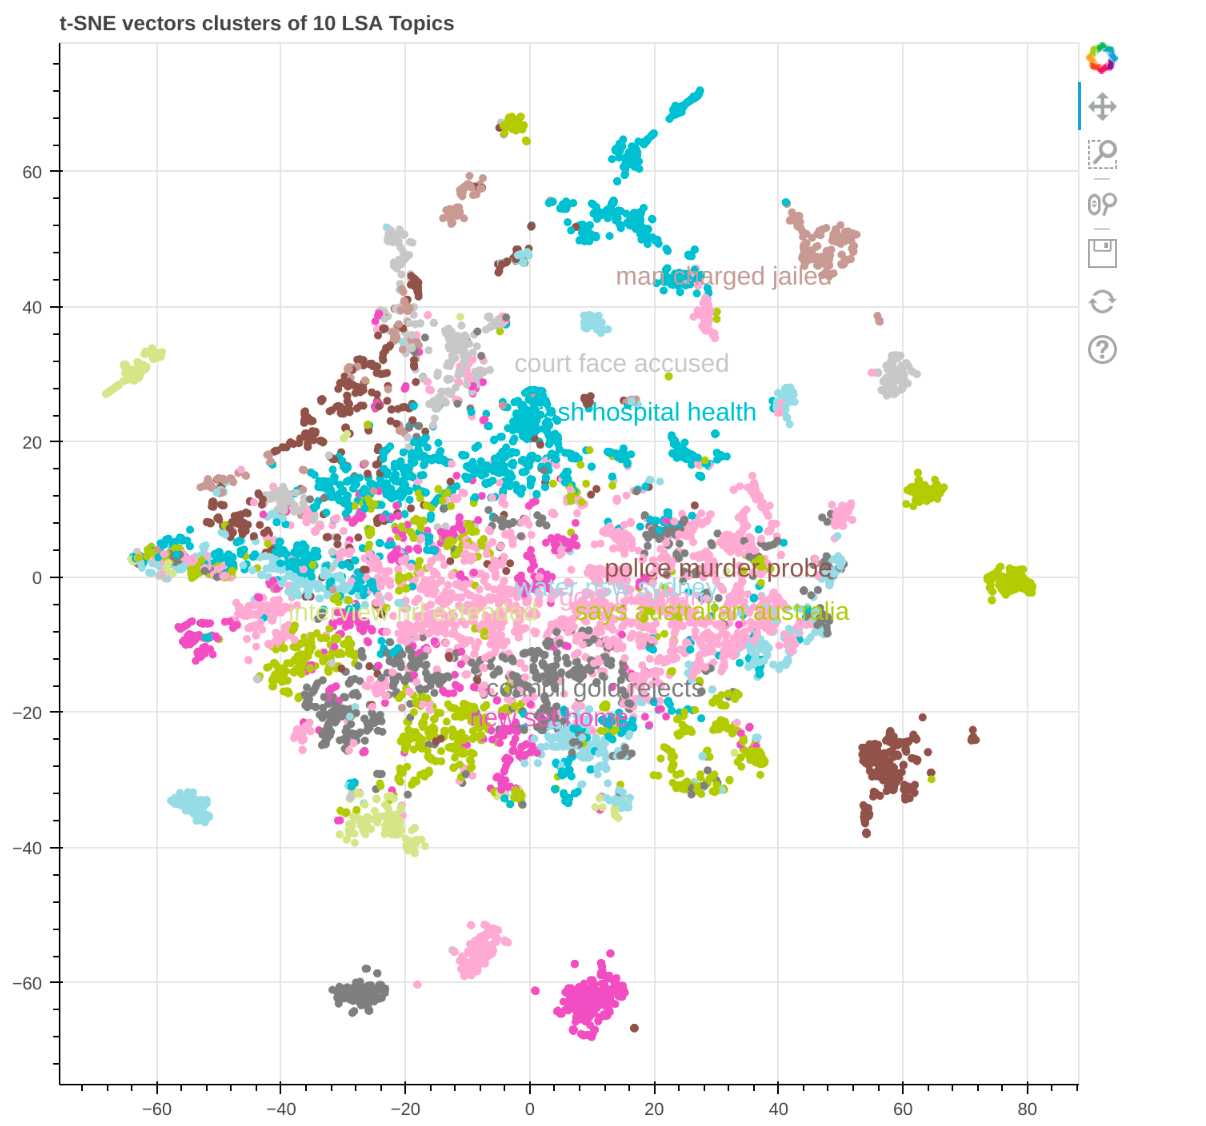 Visualizing 10 topic clusters after applying t-SNE algorithm on the output of LSA algorithm